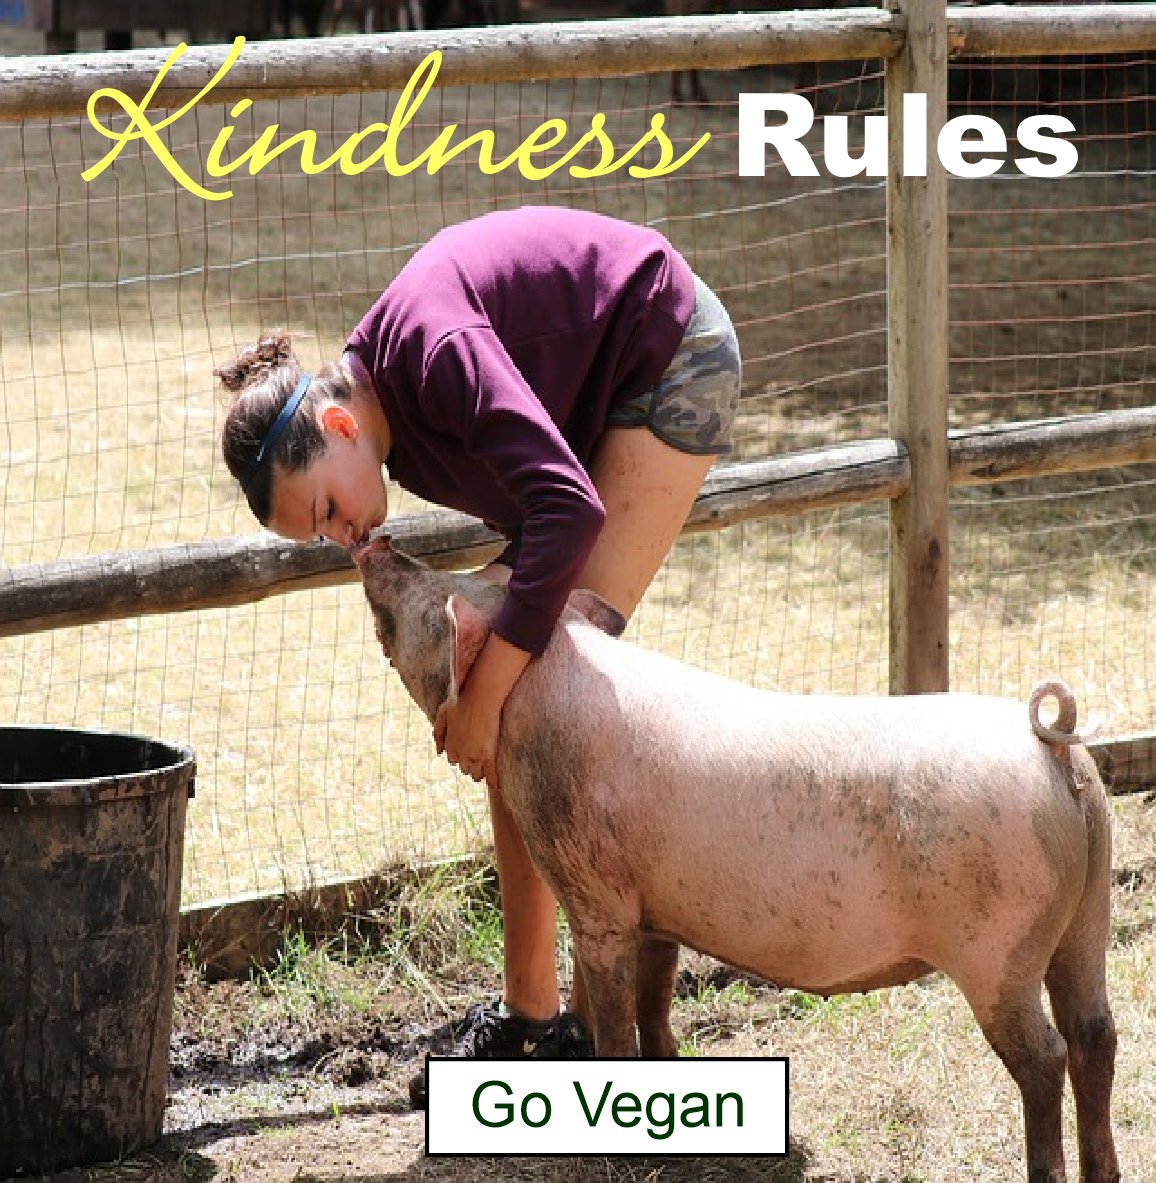 #bekindtoallkinds #govegan #kindness #peaceonearth #photos #compassion #animals #lifeisbeautiful #choosekindness #bethechange